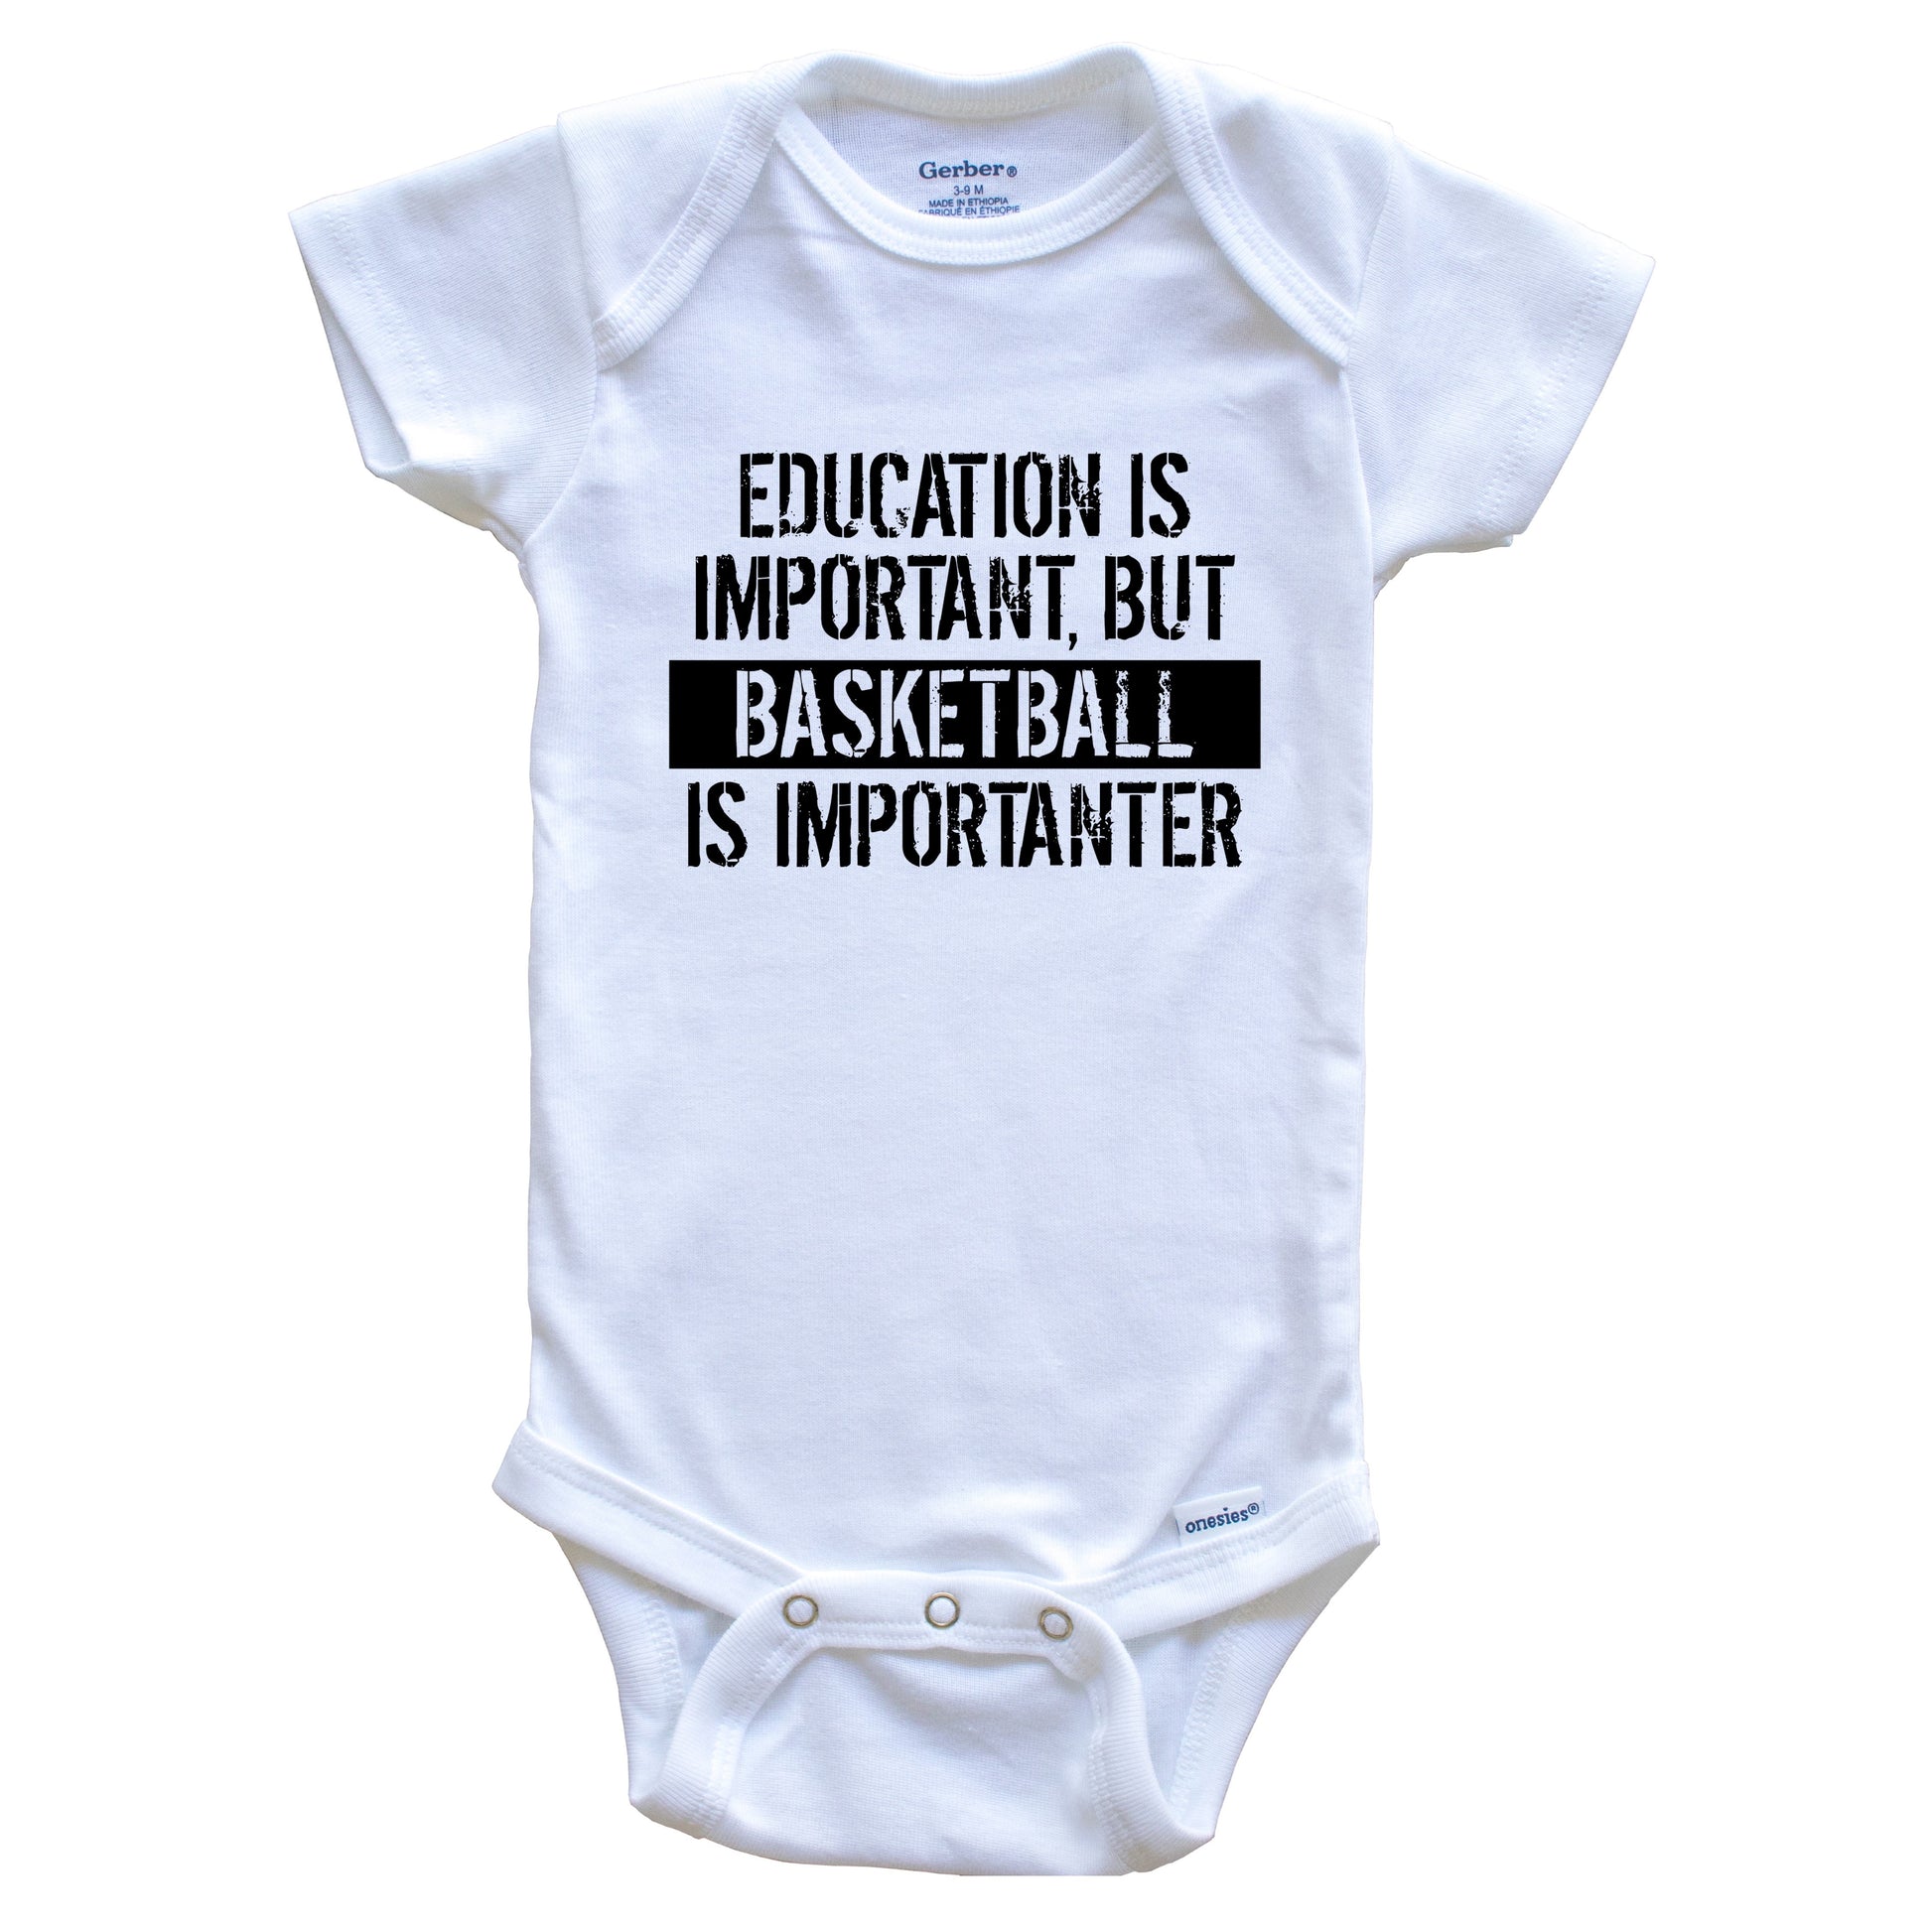 Education Is Important But Basketball Is Importanter Funny Baby Onesie